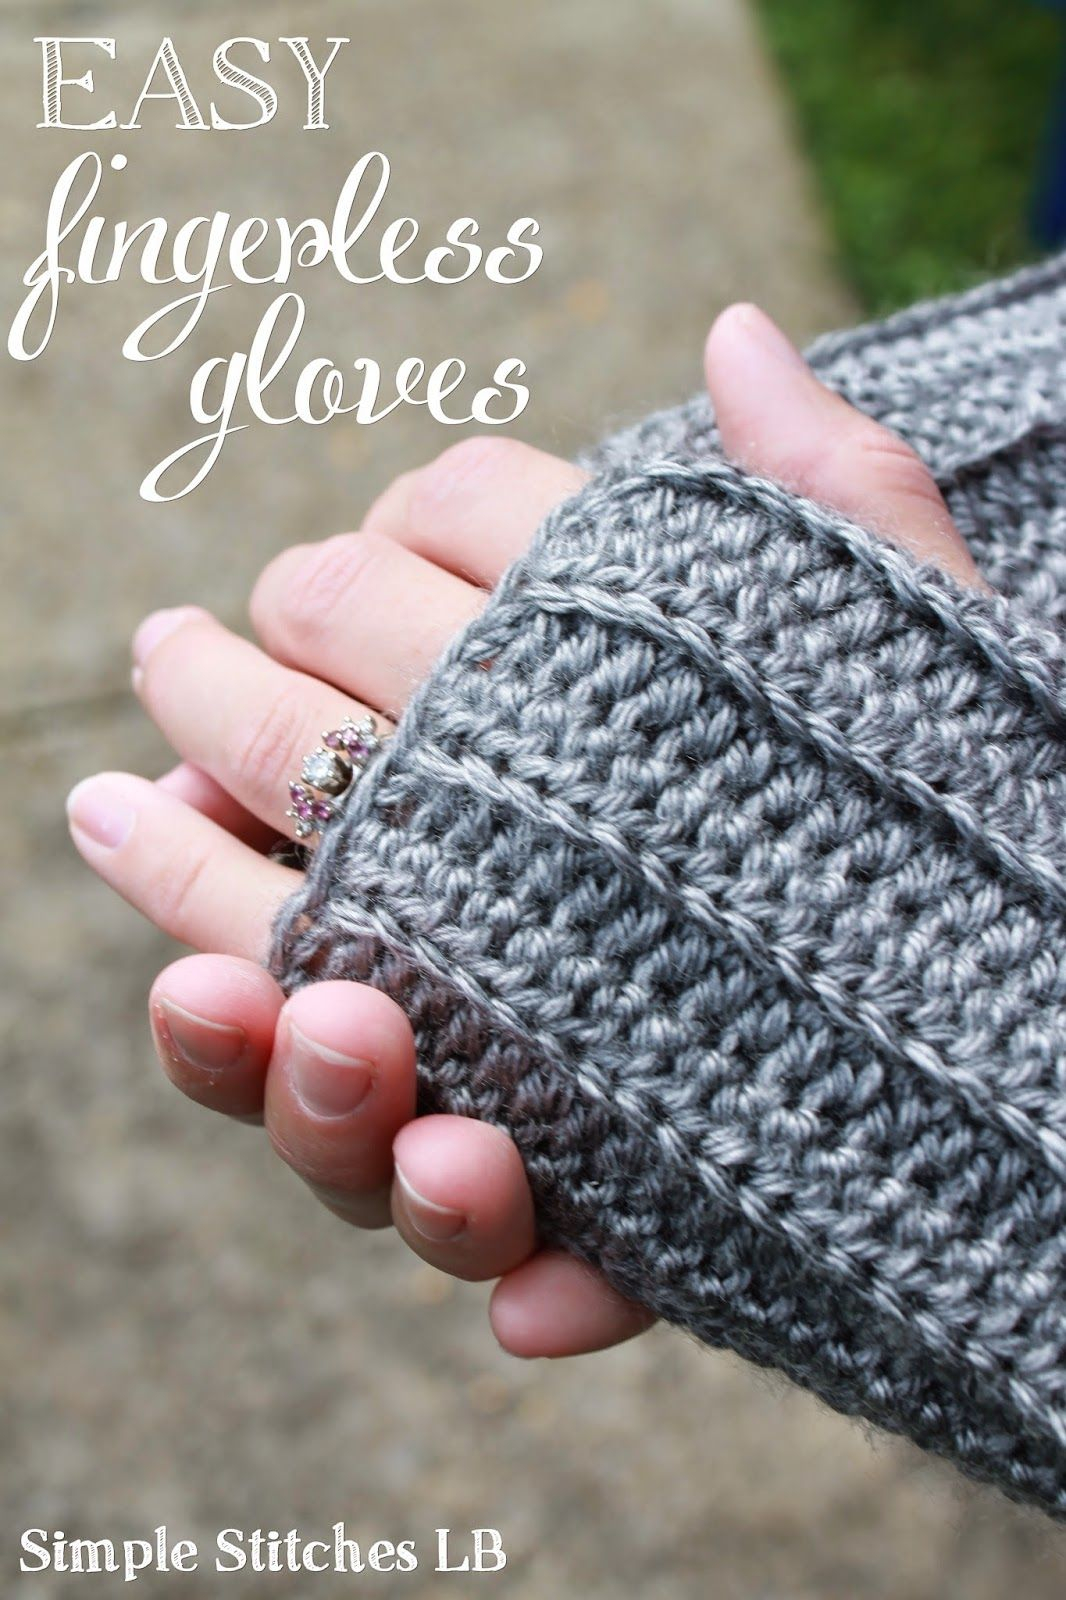 Free Crochet Pattern Hand Warmers Simple Stitches Free Pattern Easy Ribbed Fingerless Gloves